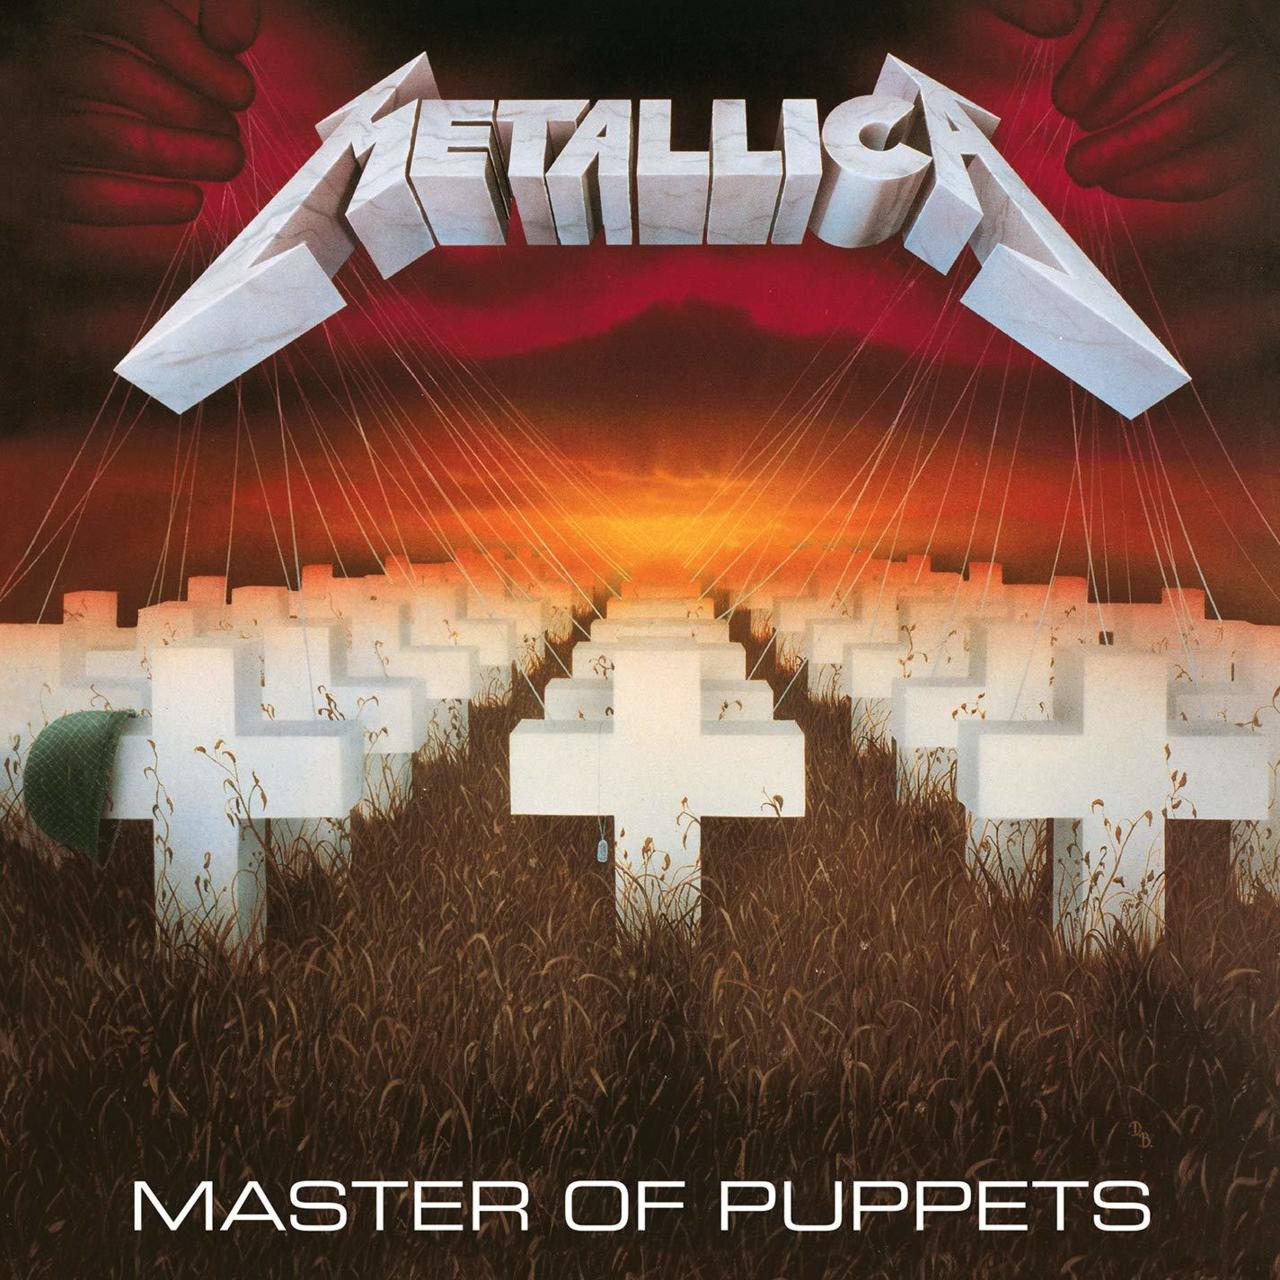 6. Master of Puppets